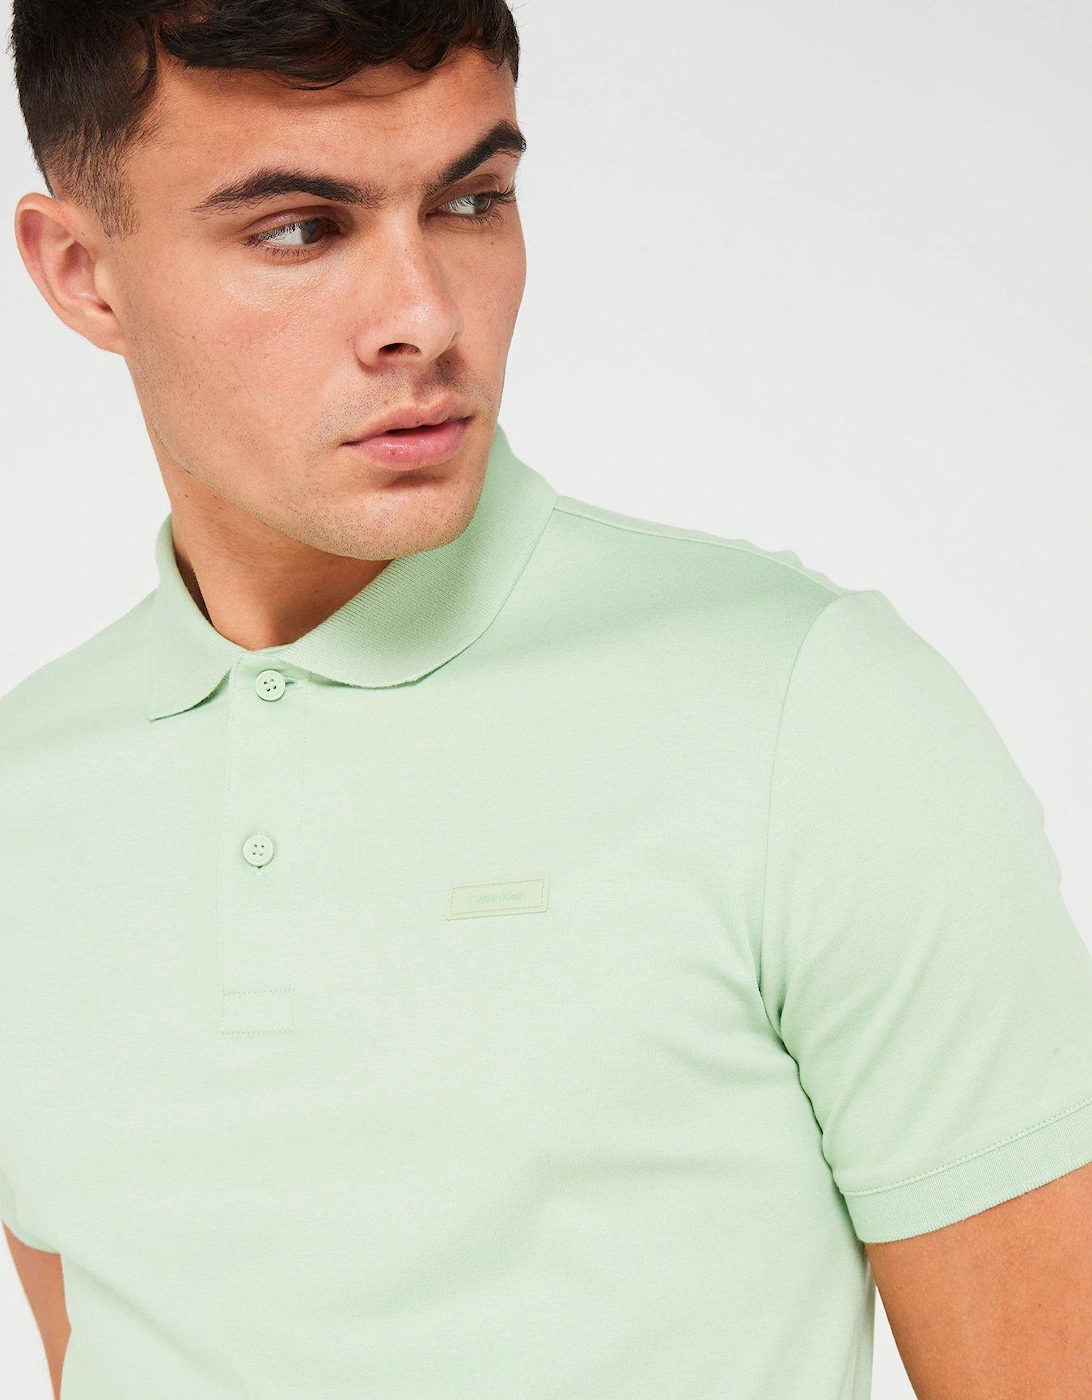 Smooth Cotton Slim Fit Polo Shirt - Light Green 